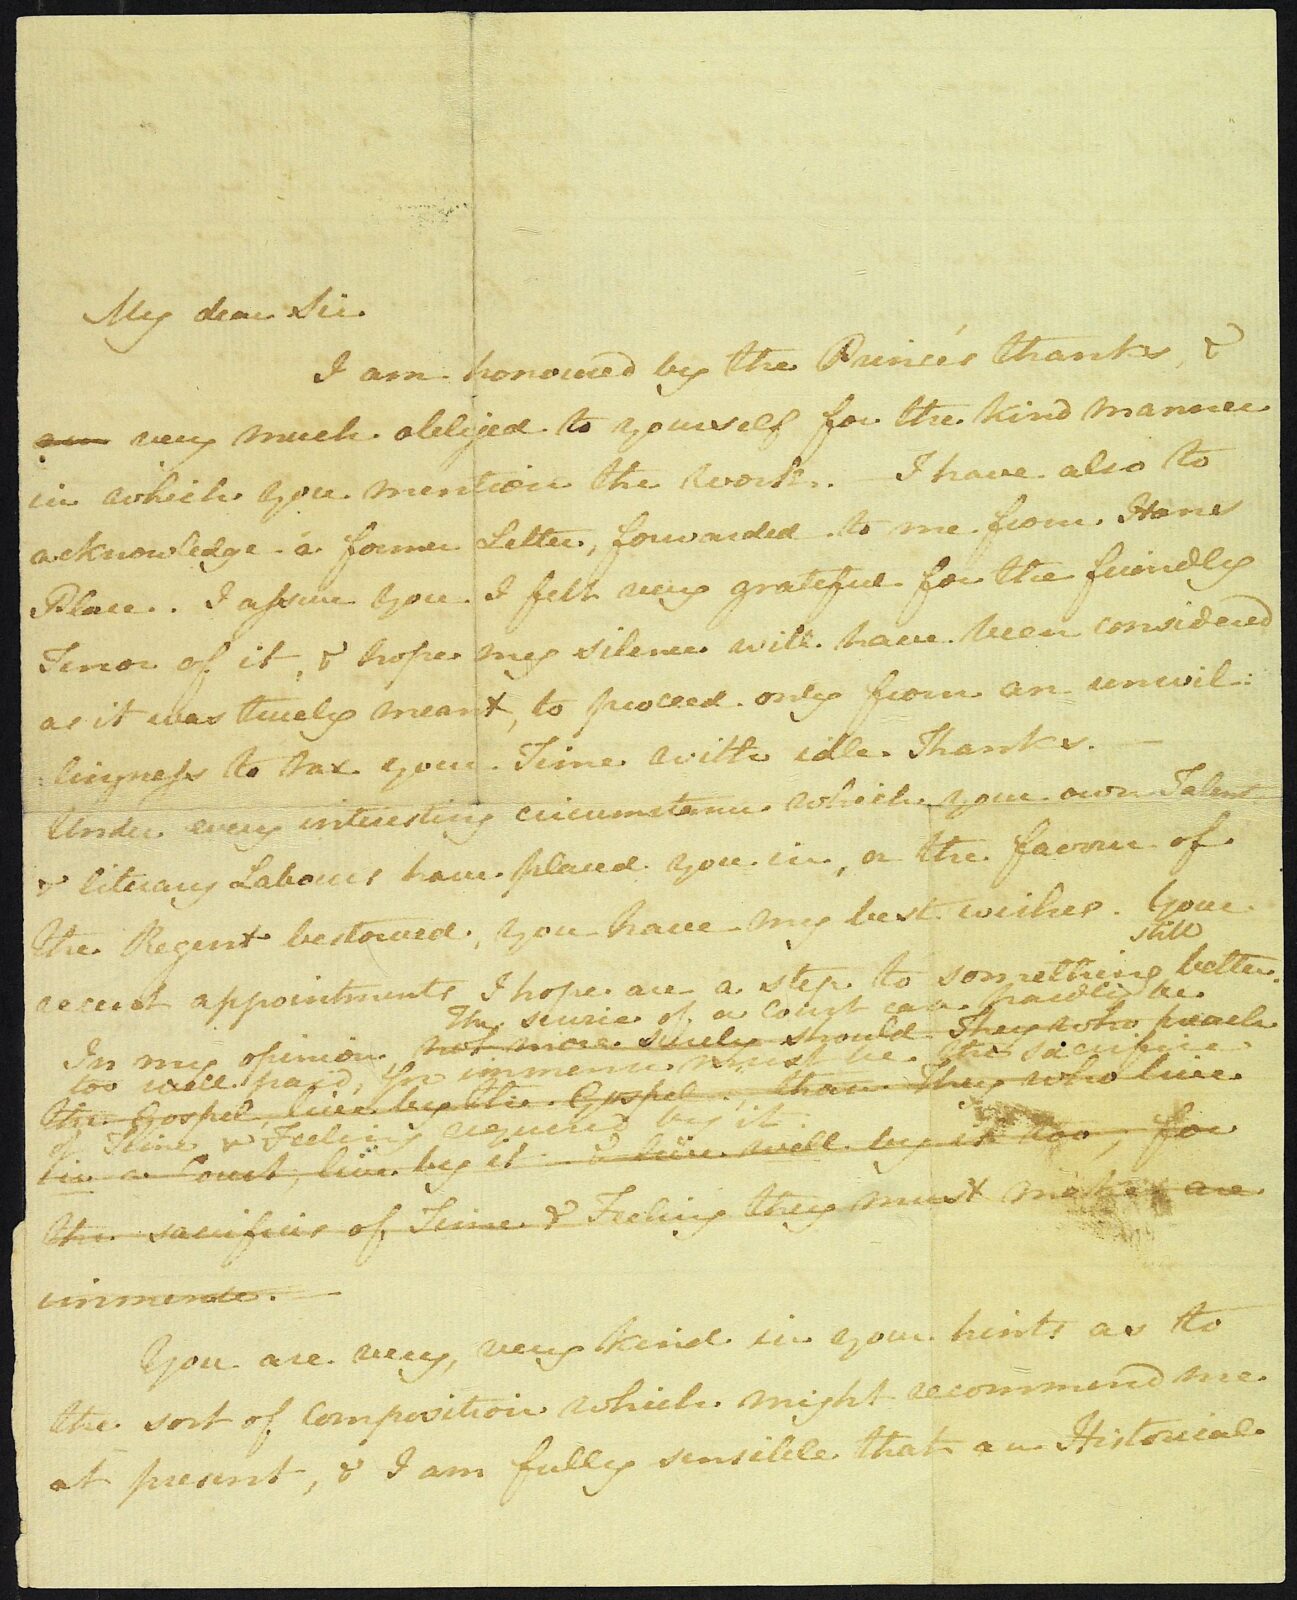 The first page of a letter from Jane Austen to James Stanier Clarke, 1 April 1816